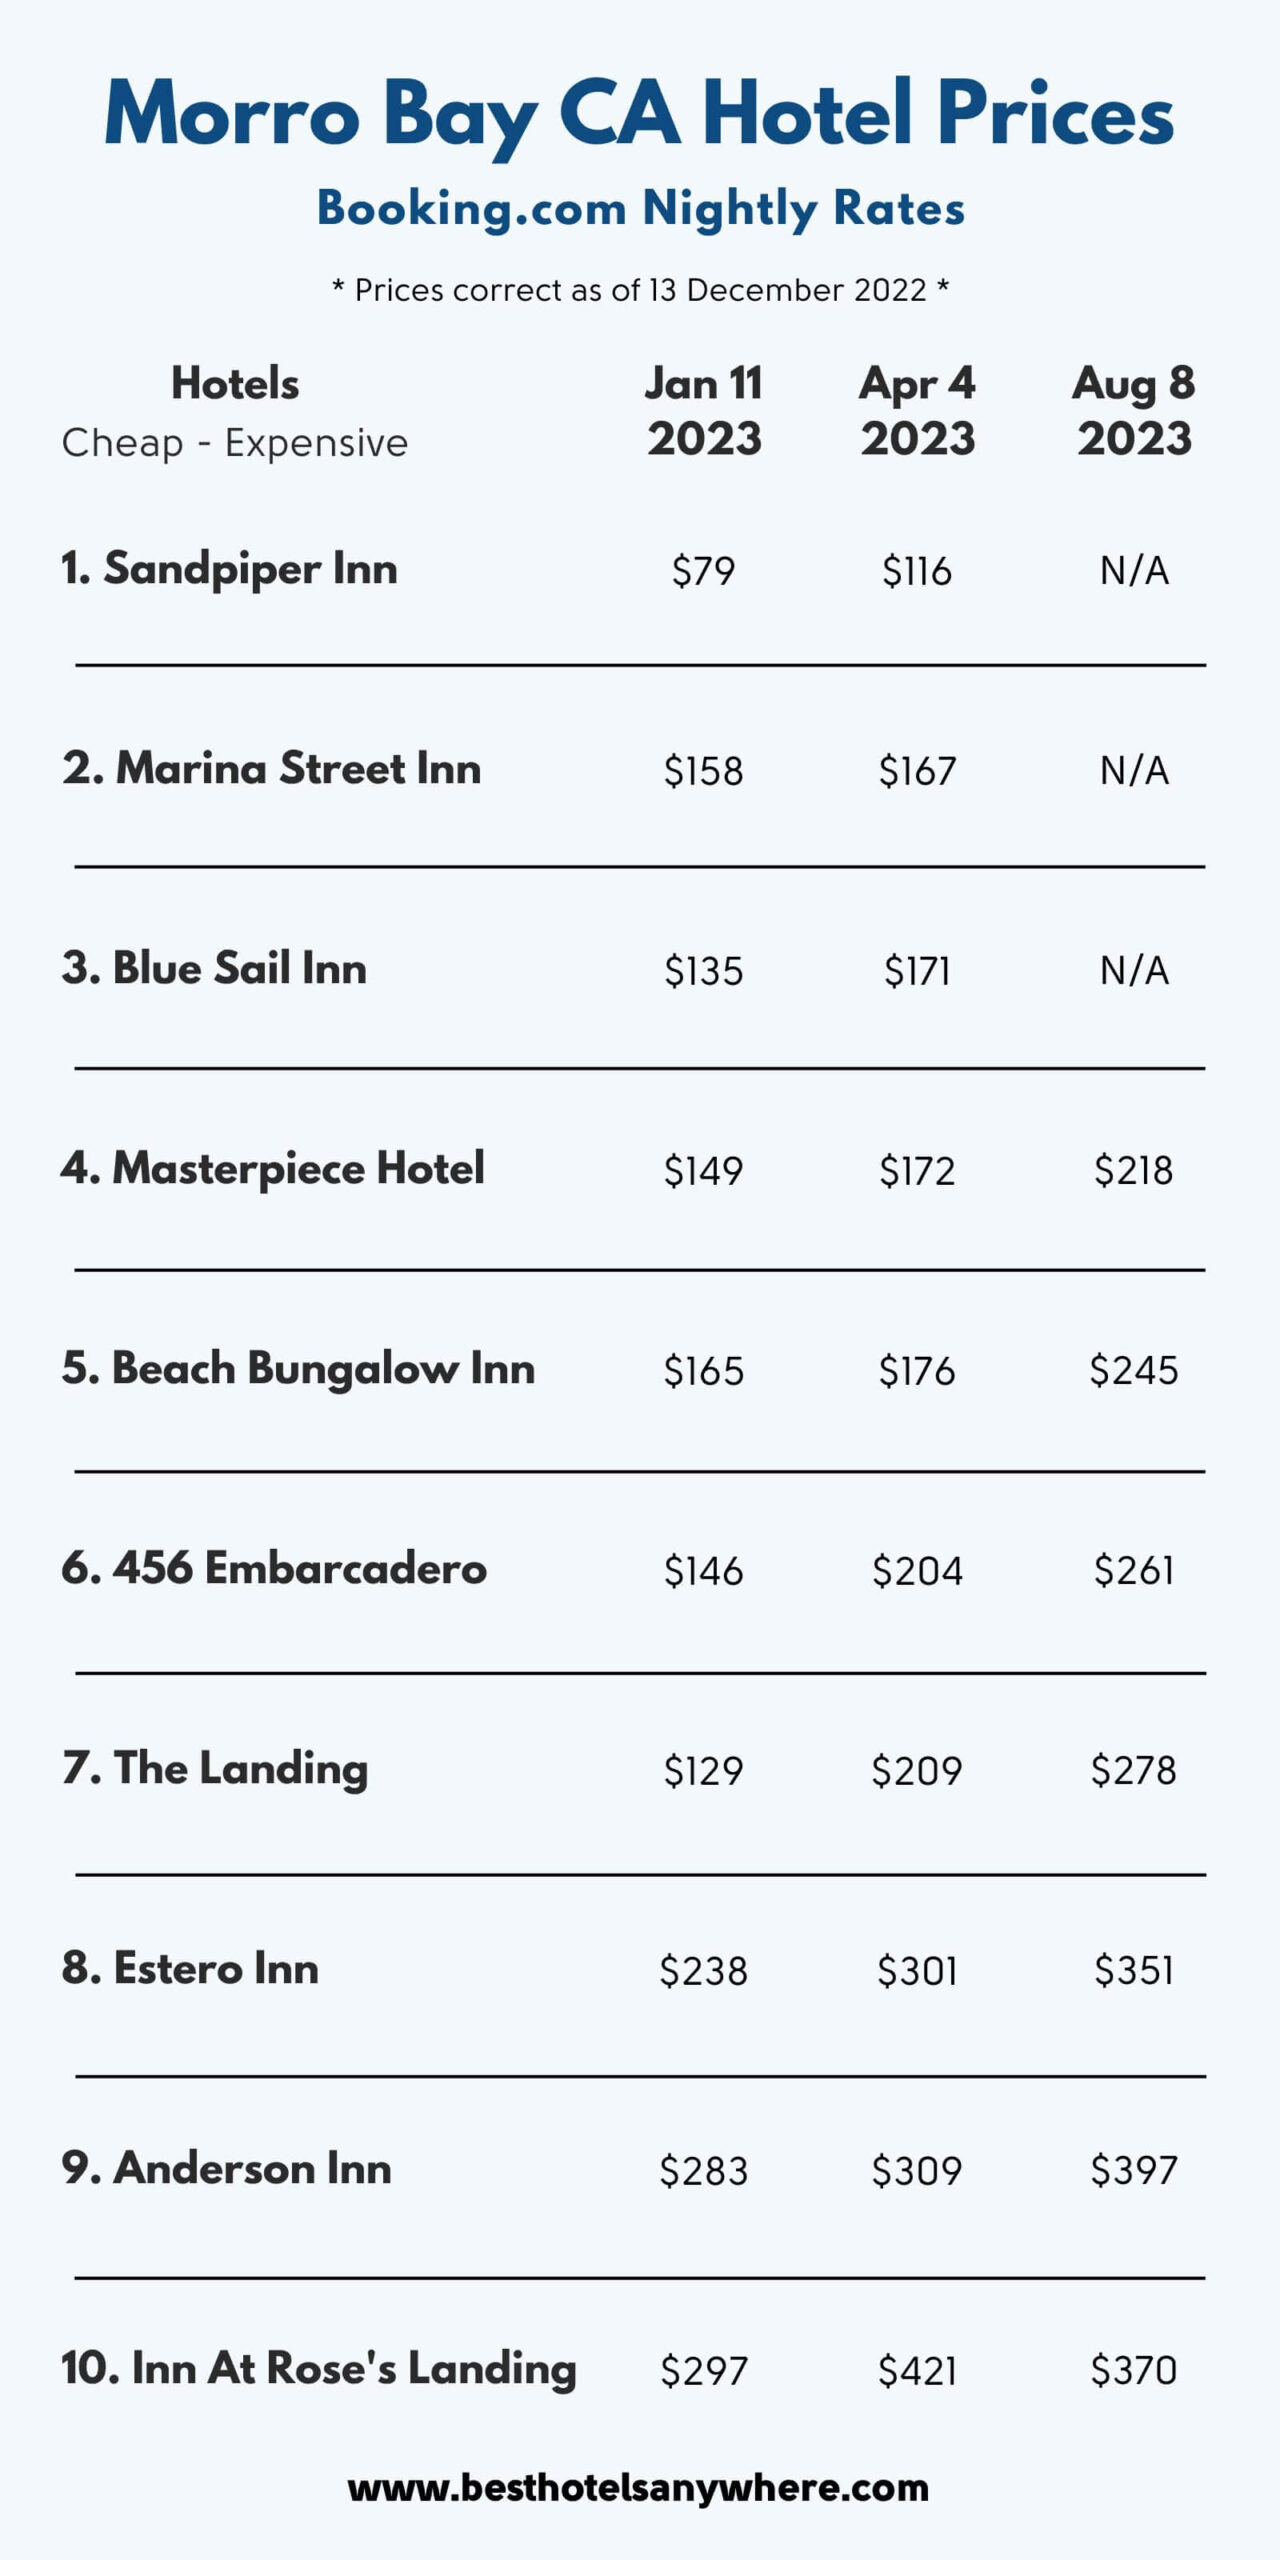 Infographic created by Best Hotels Anywhere showing nightly hotel prices for three future dates in Morro Bay CA